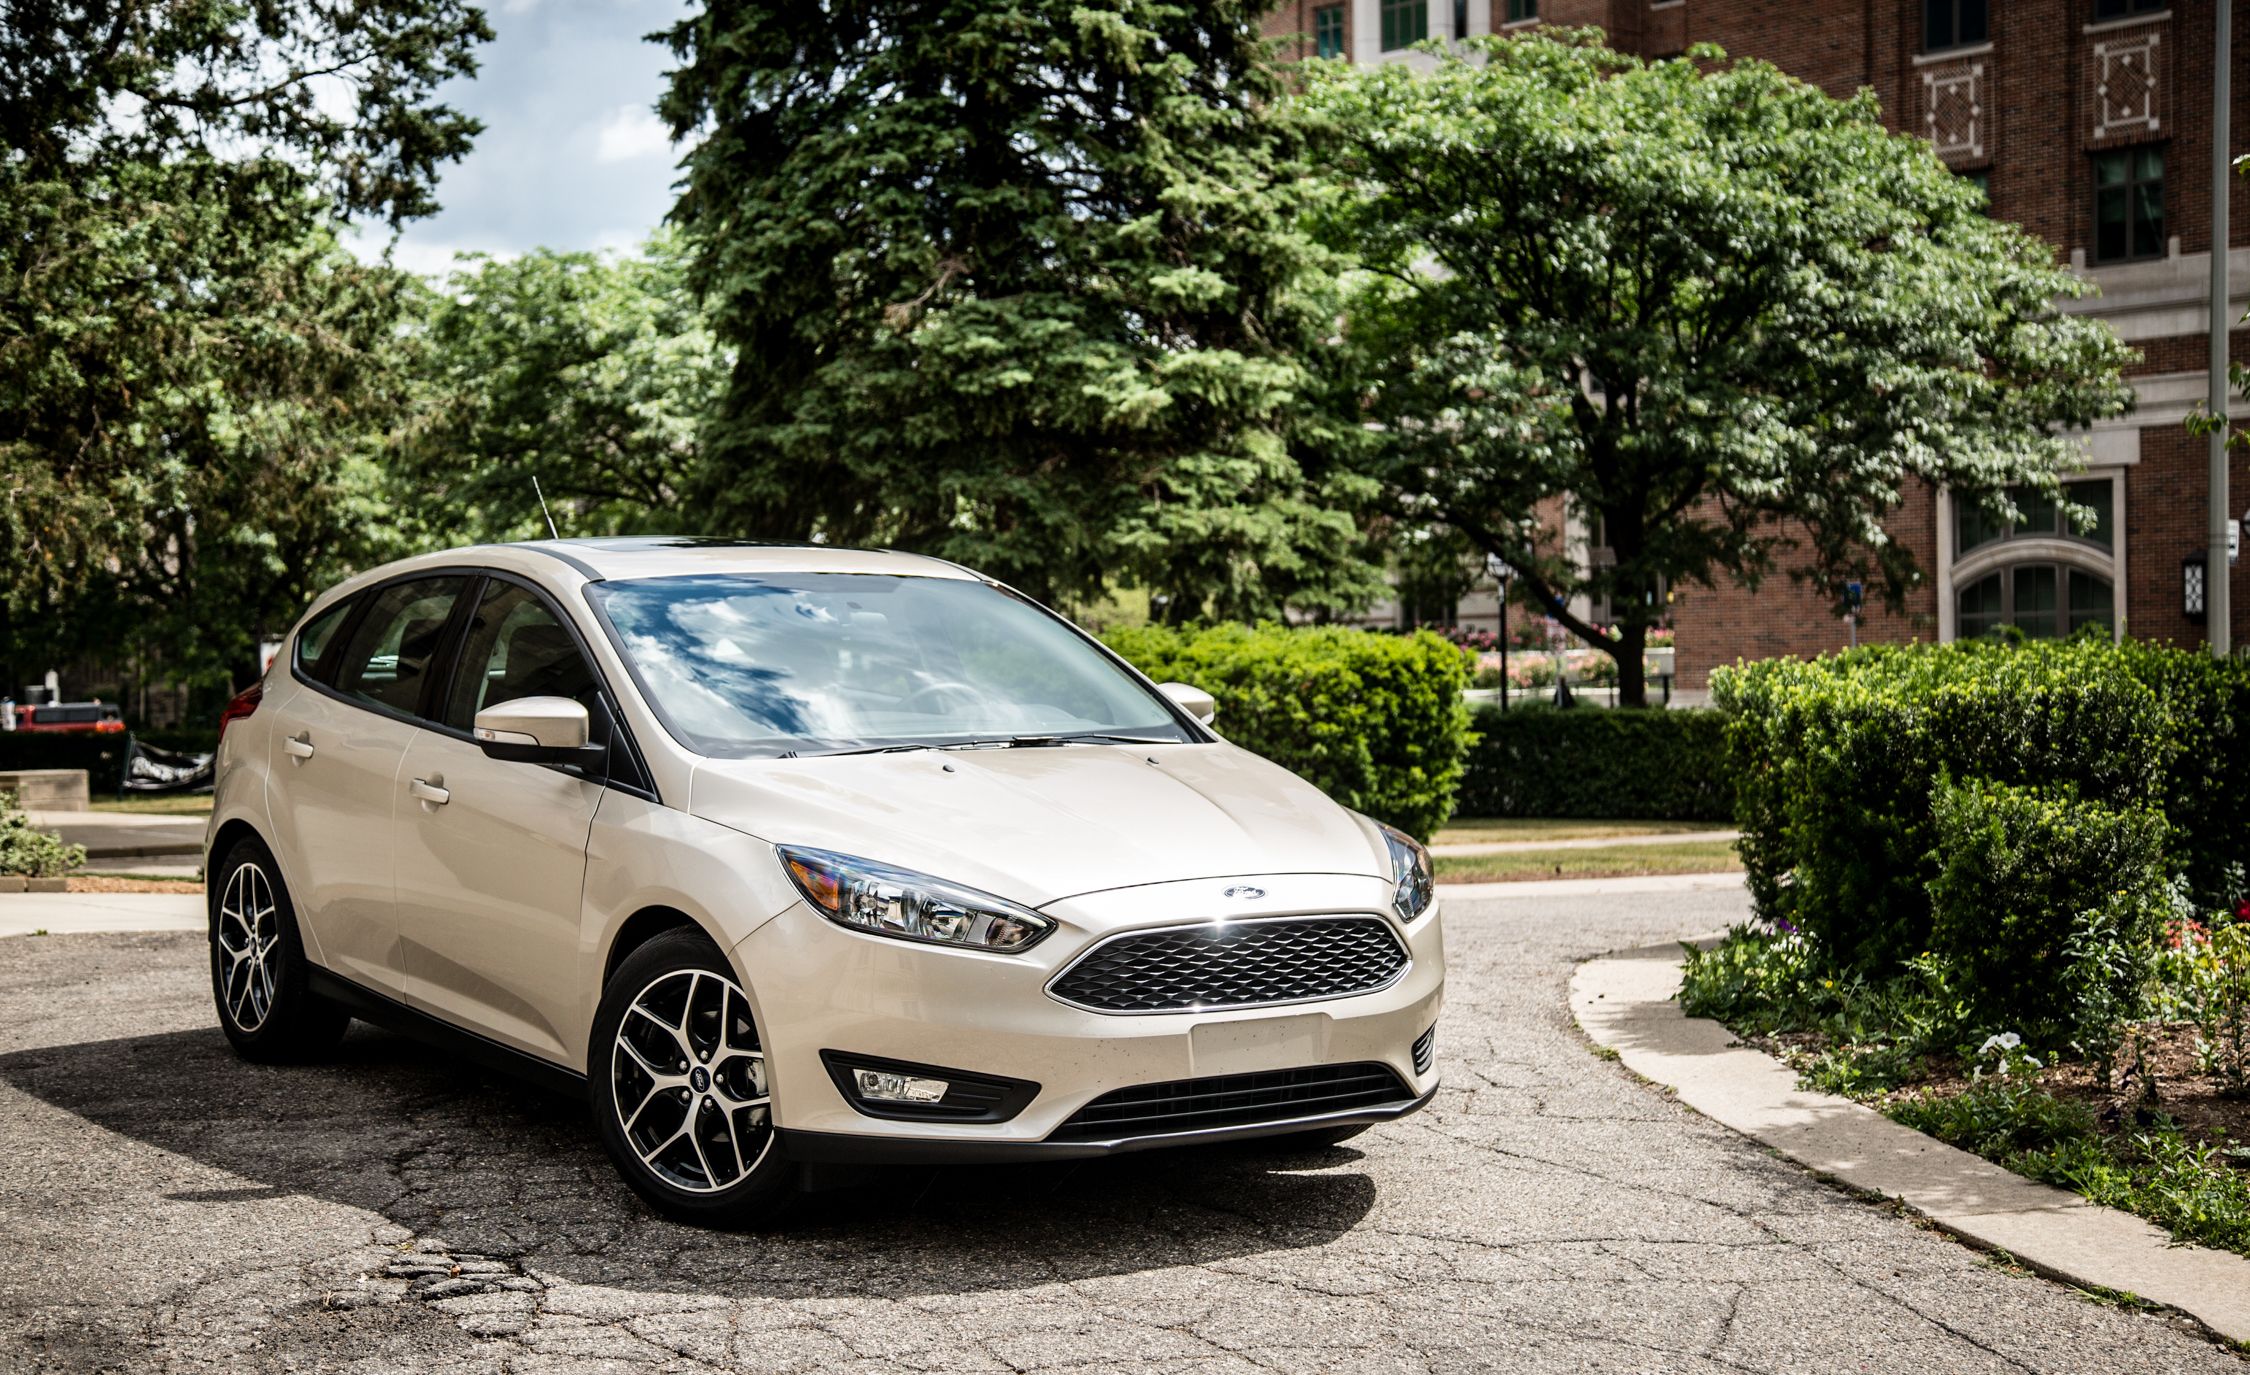 2017 Ford Focus  Specifications  Car Specs  Auto123